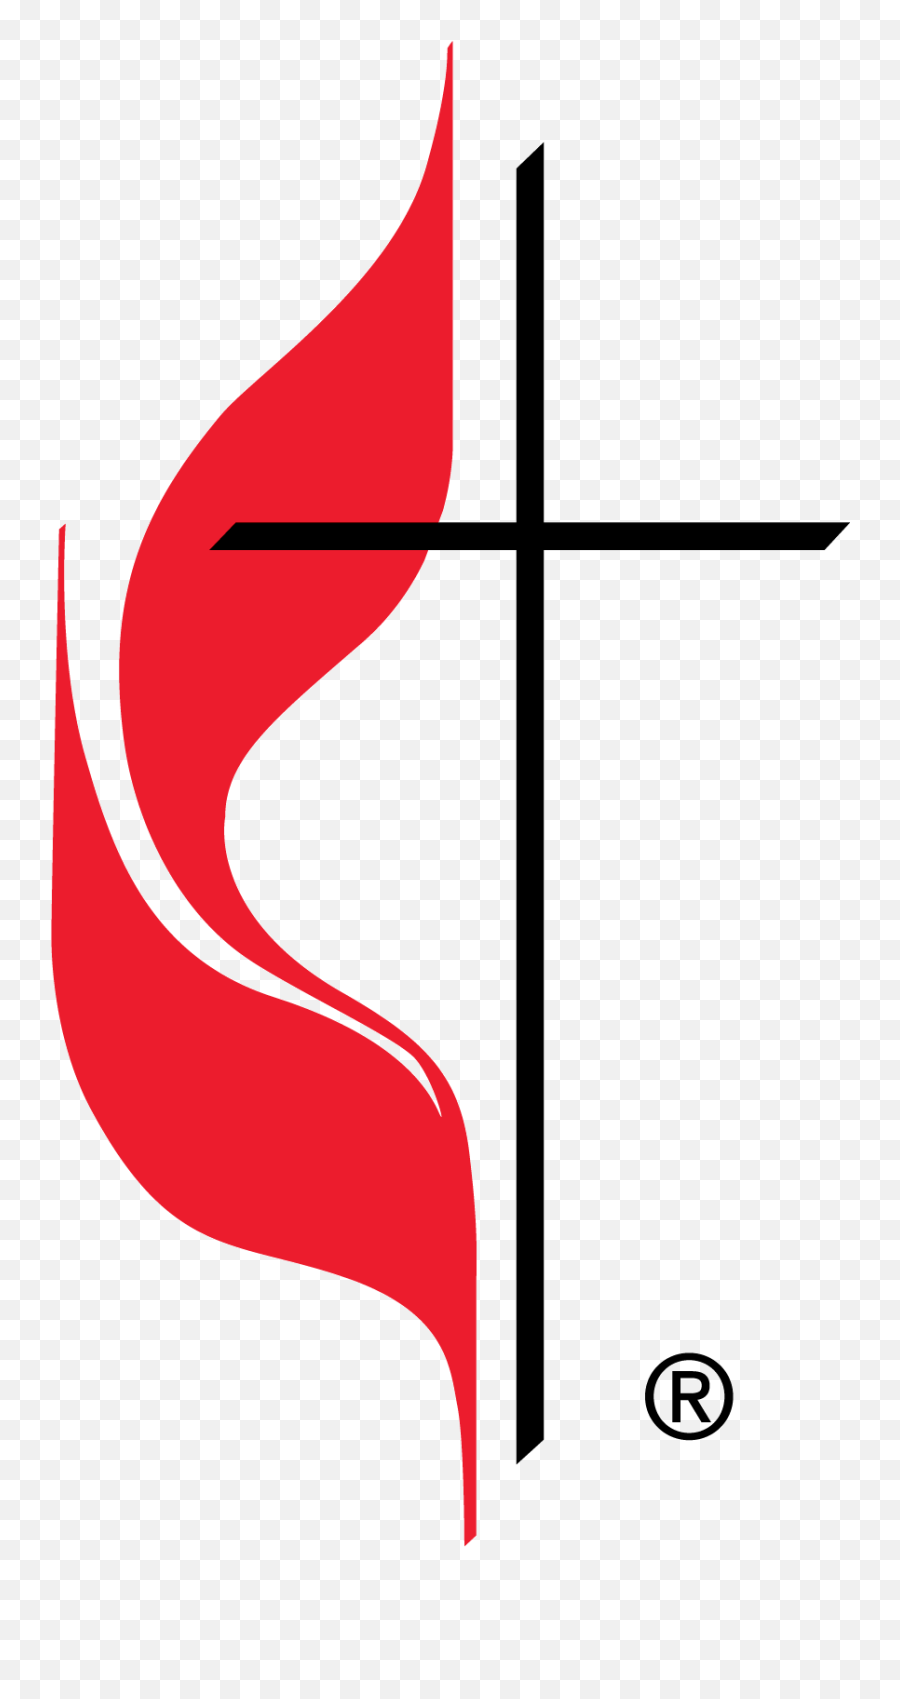 A Mark Known The World Over The United Methodist Church - United Methodist Church Emoji,Jesus Cross Emoji